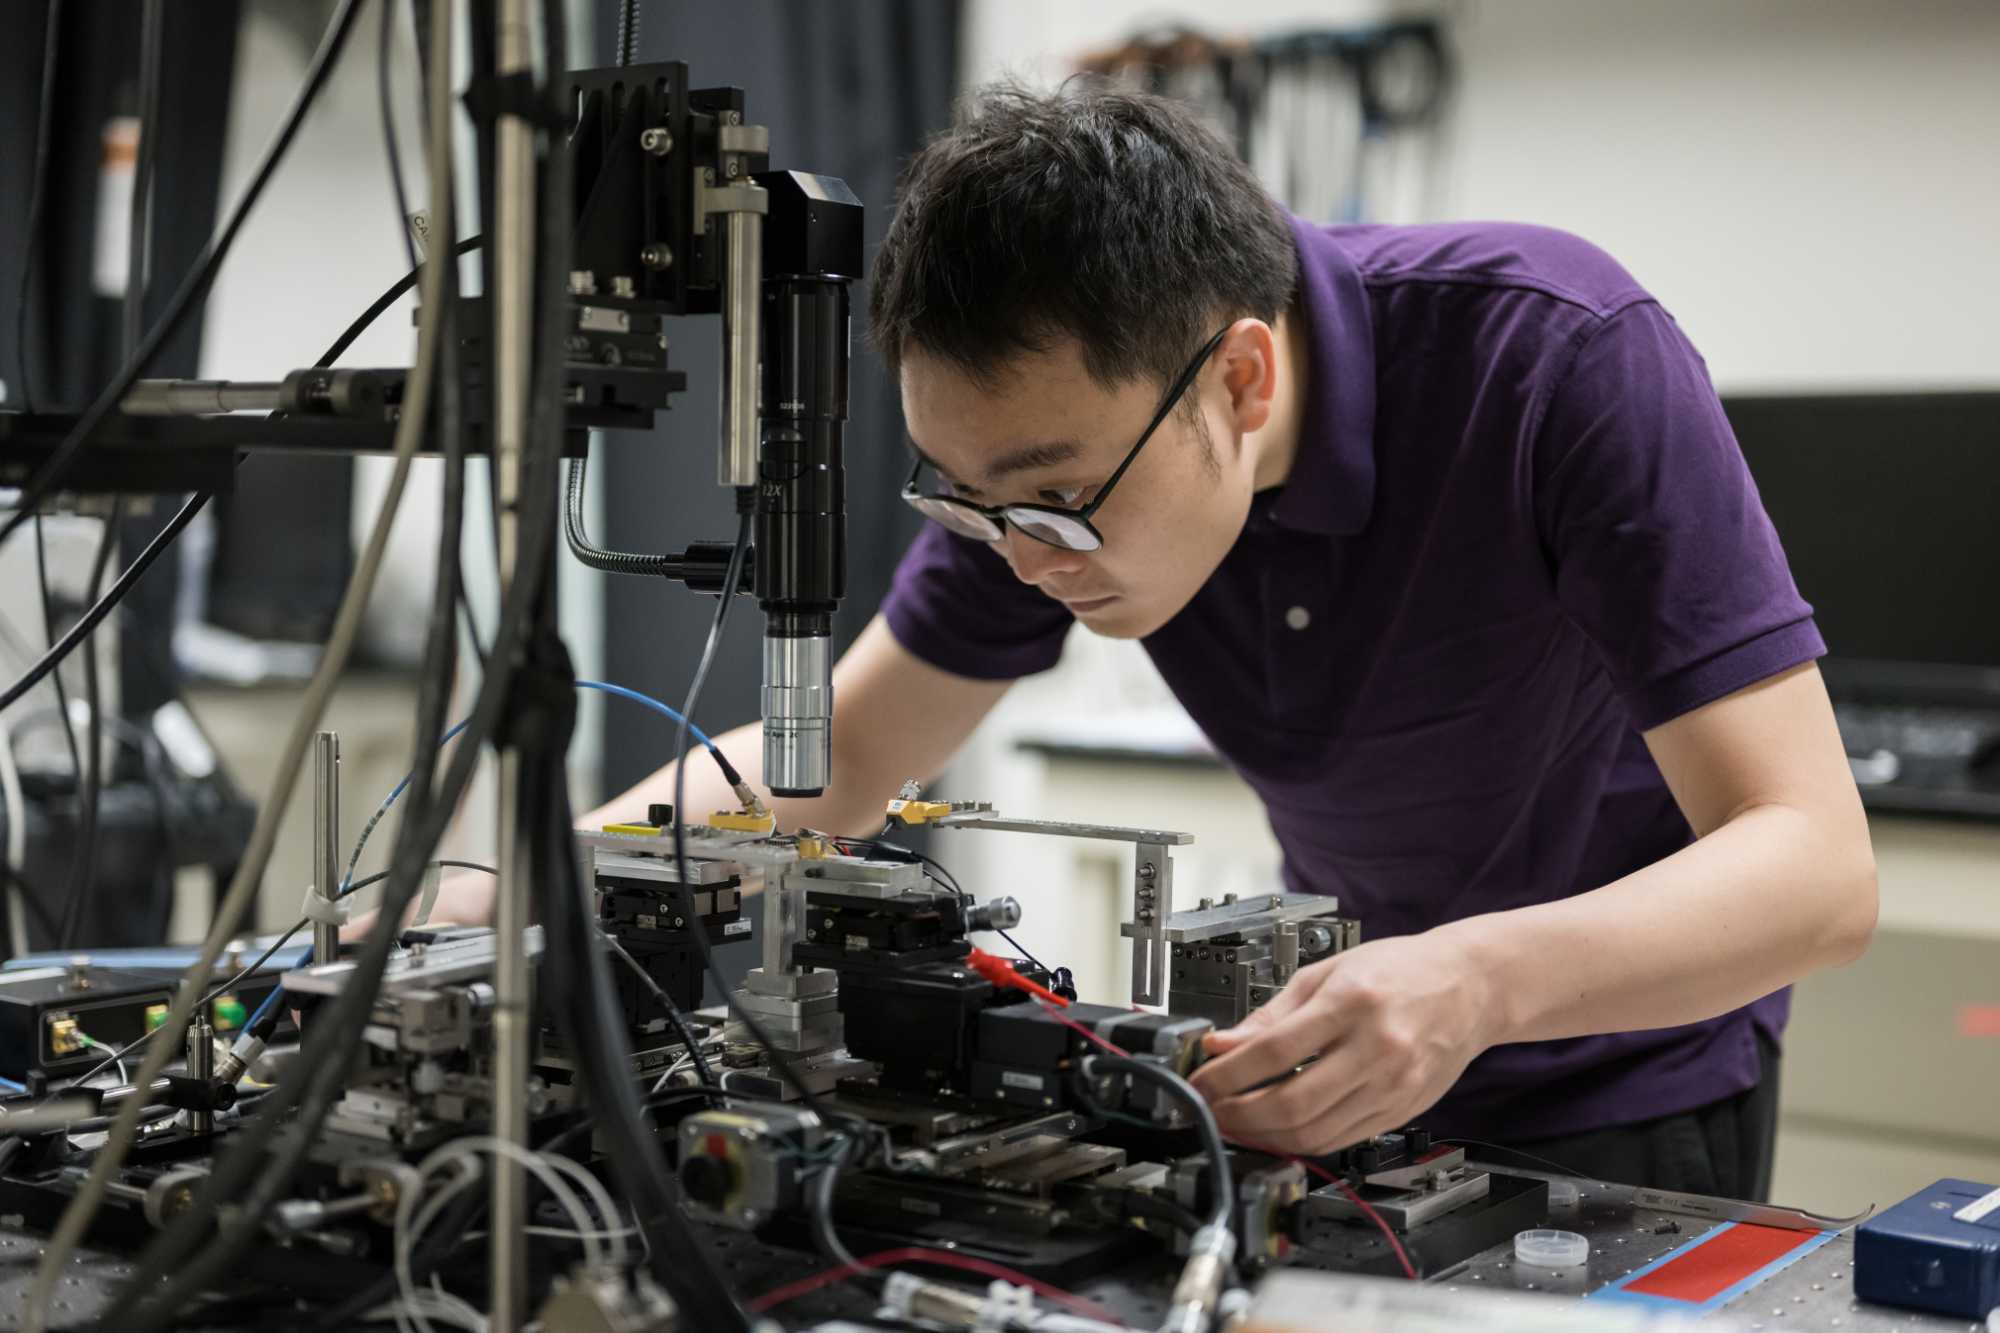 A graduate student adjust a new "all in one" microcomb laser device in a lab.